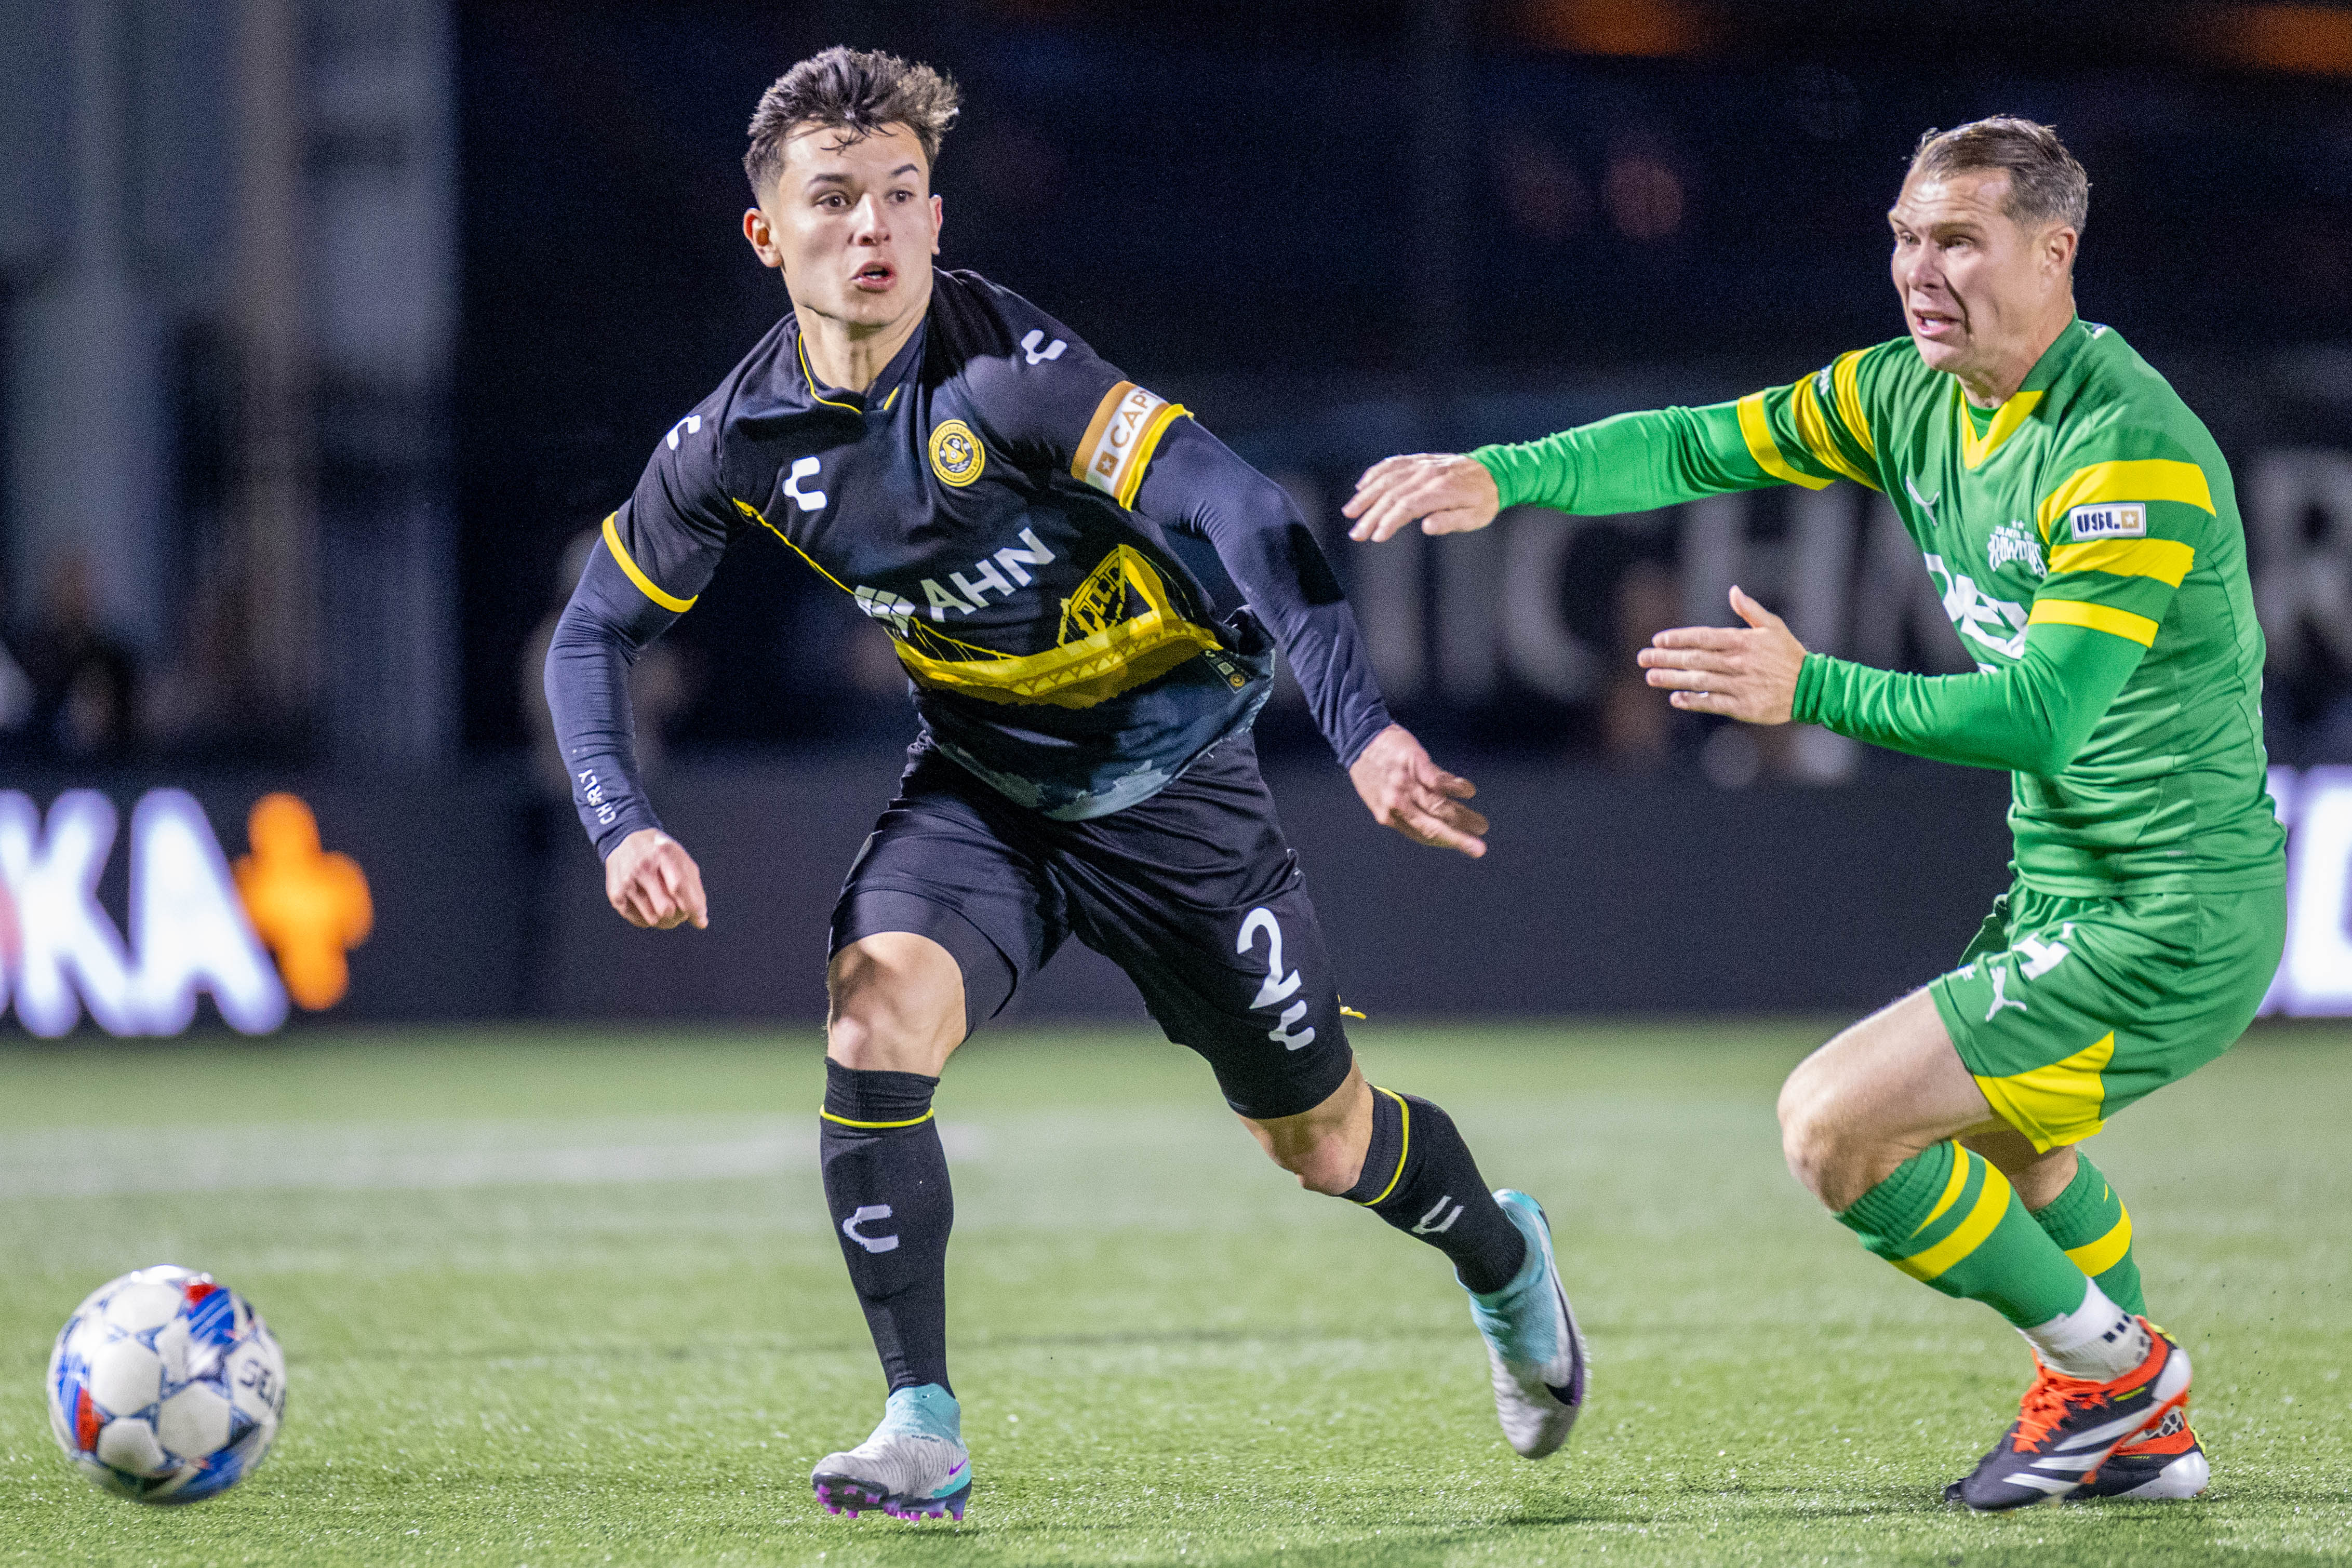 Hounds, Rowdies battle to stalemate featured image